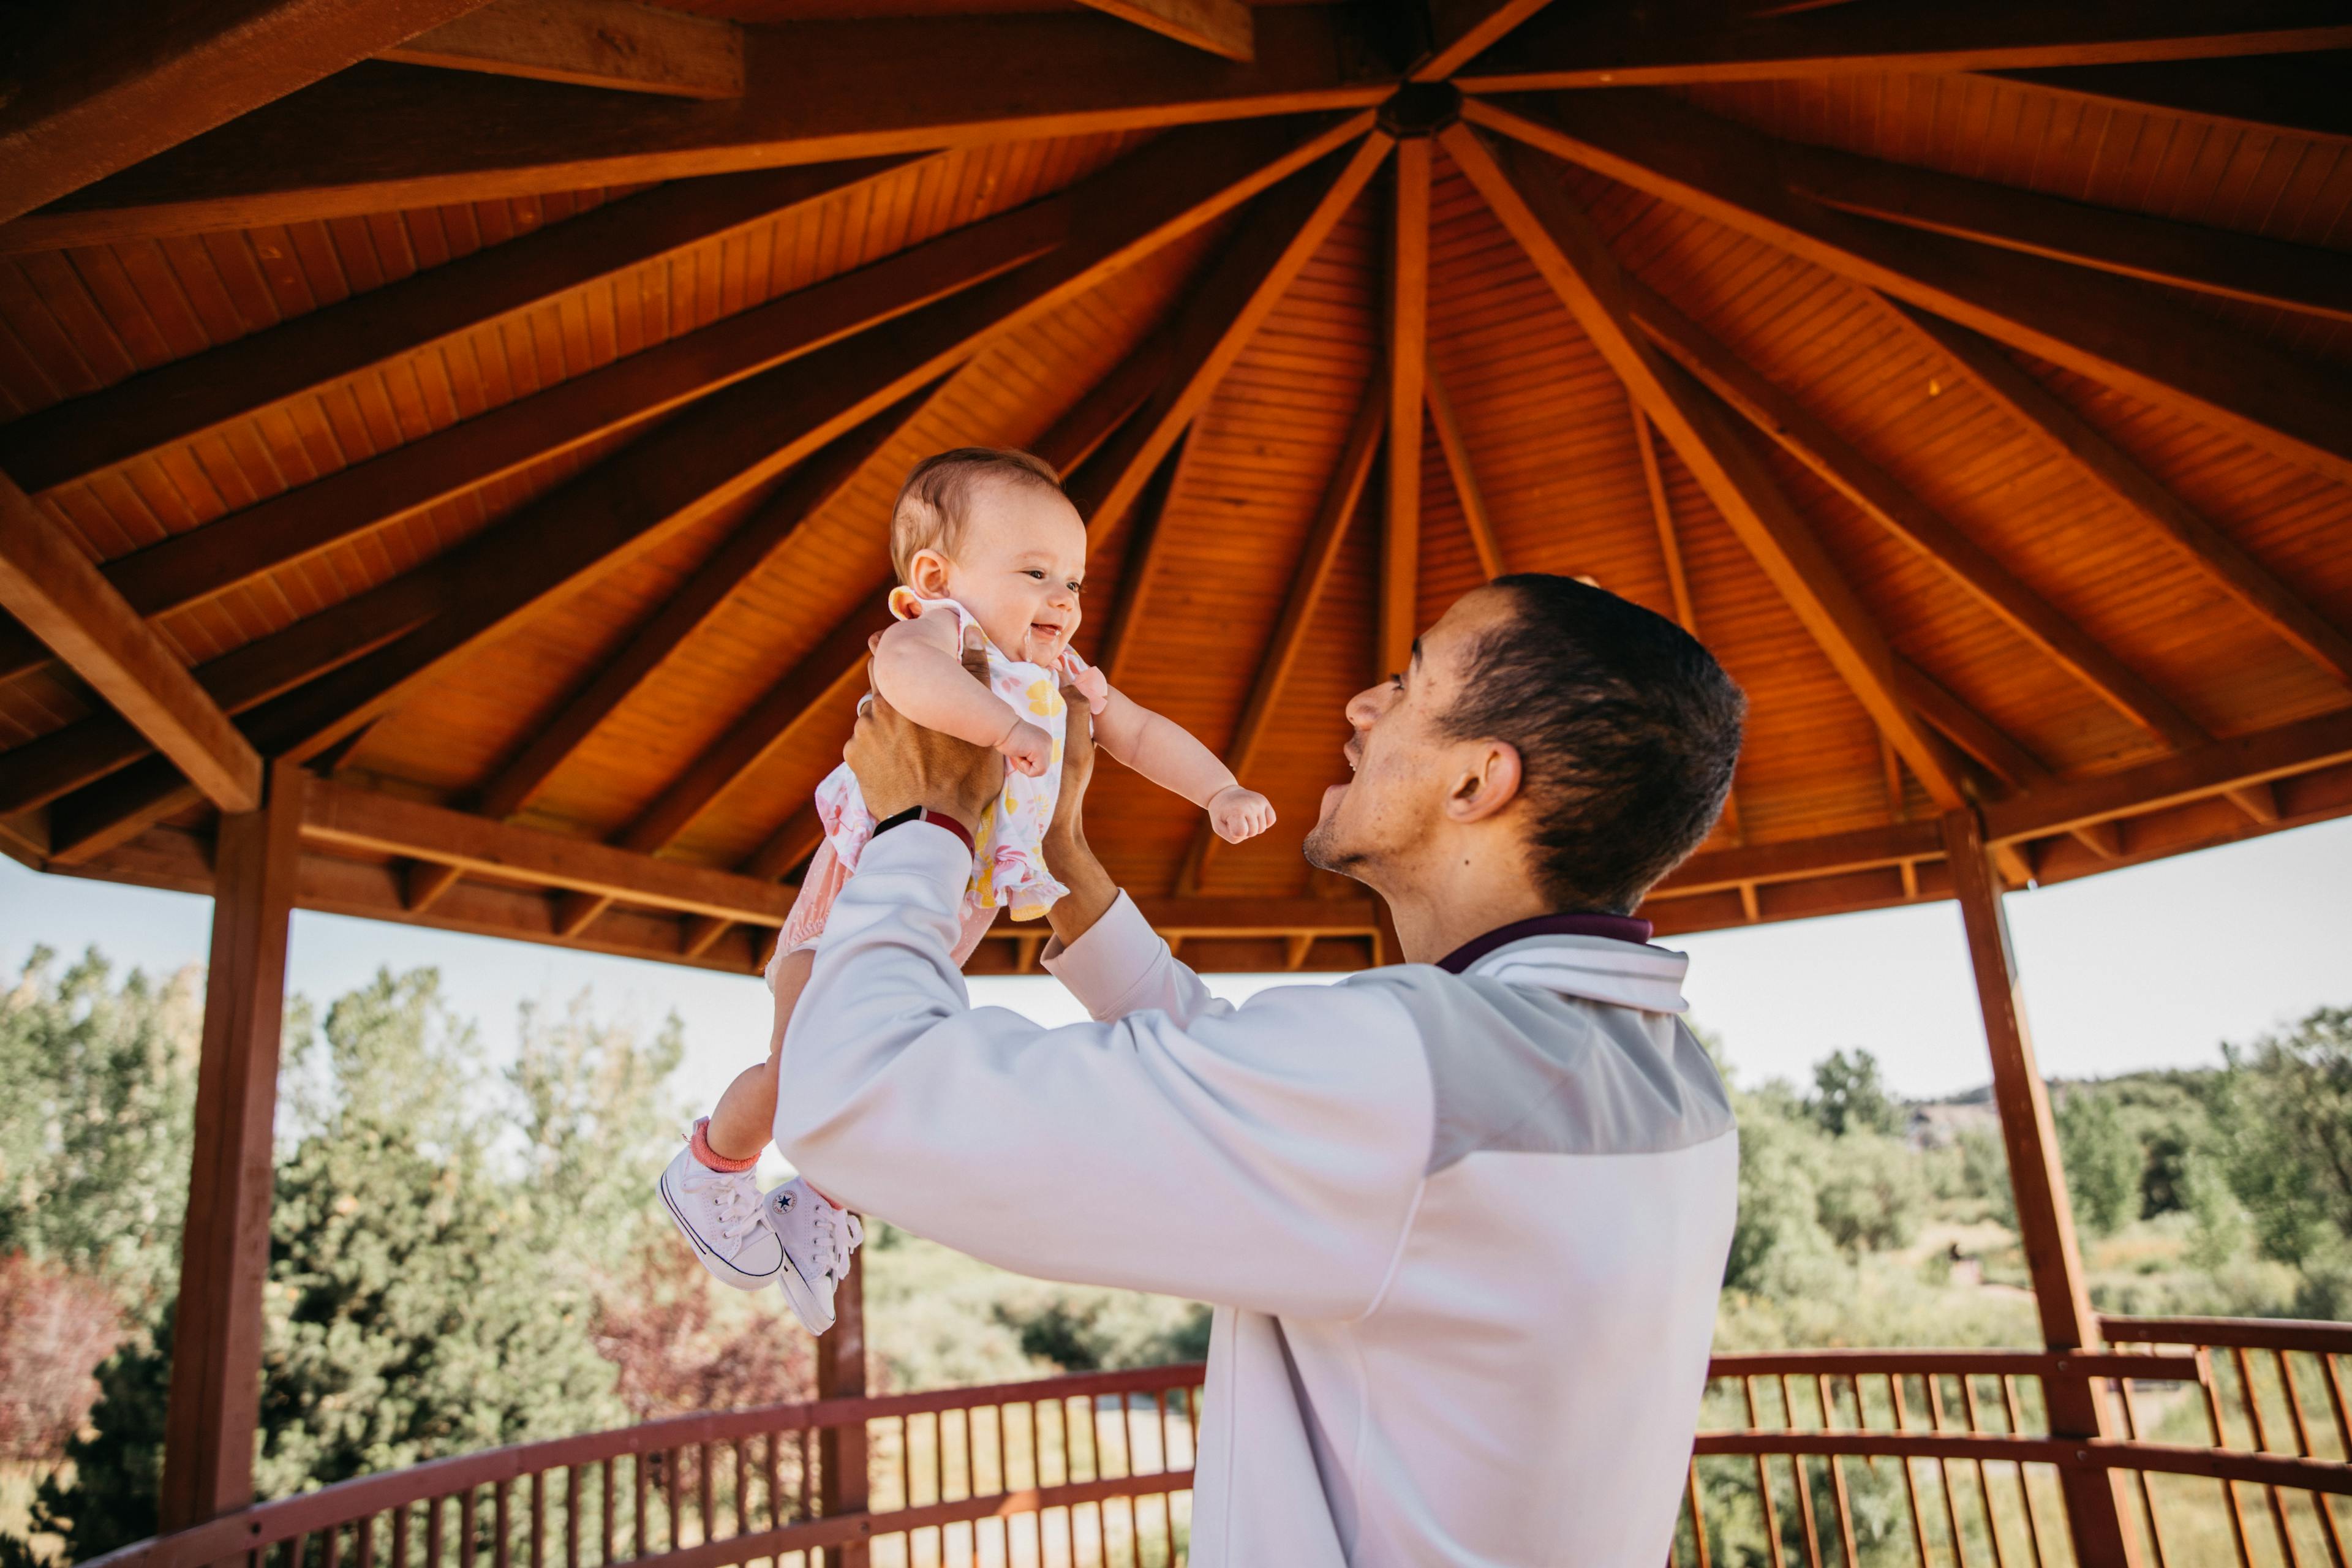 Father lifting up his smiling baby high in a gazebo